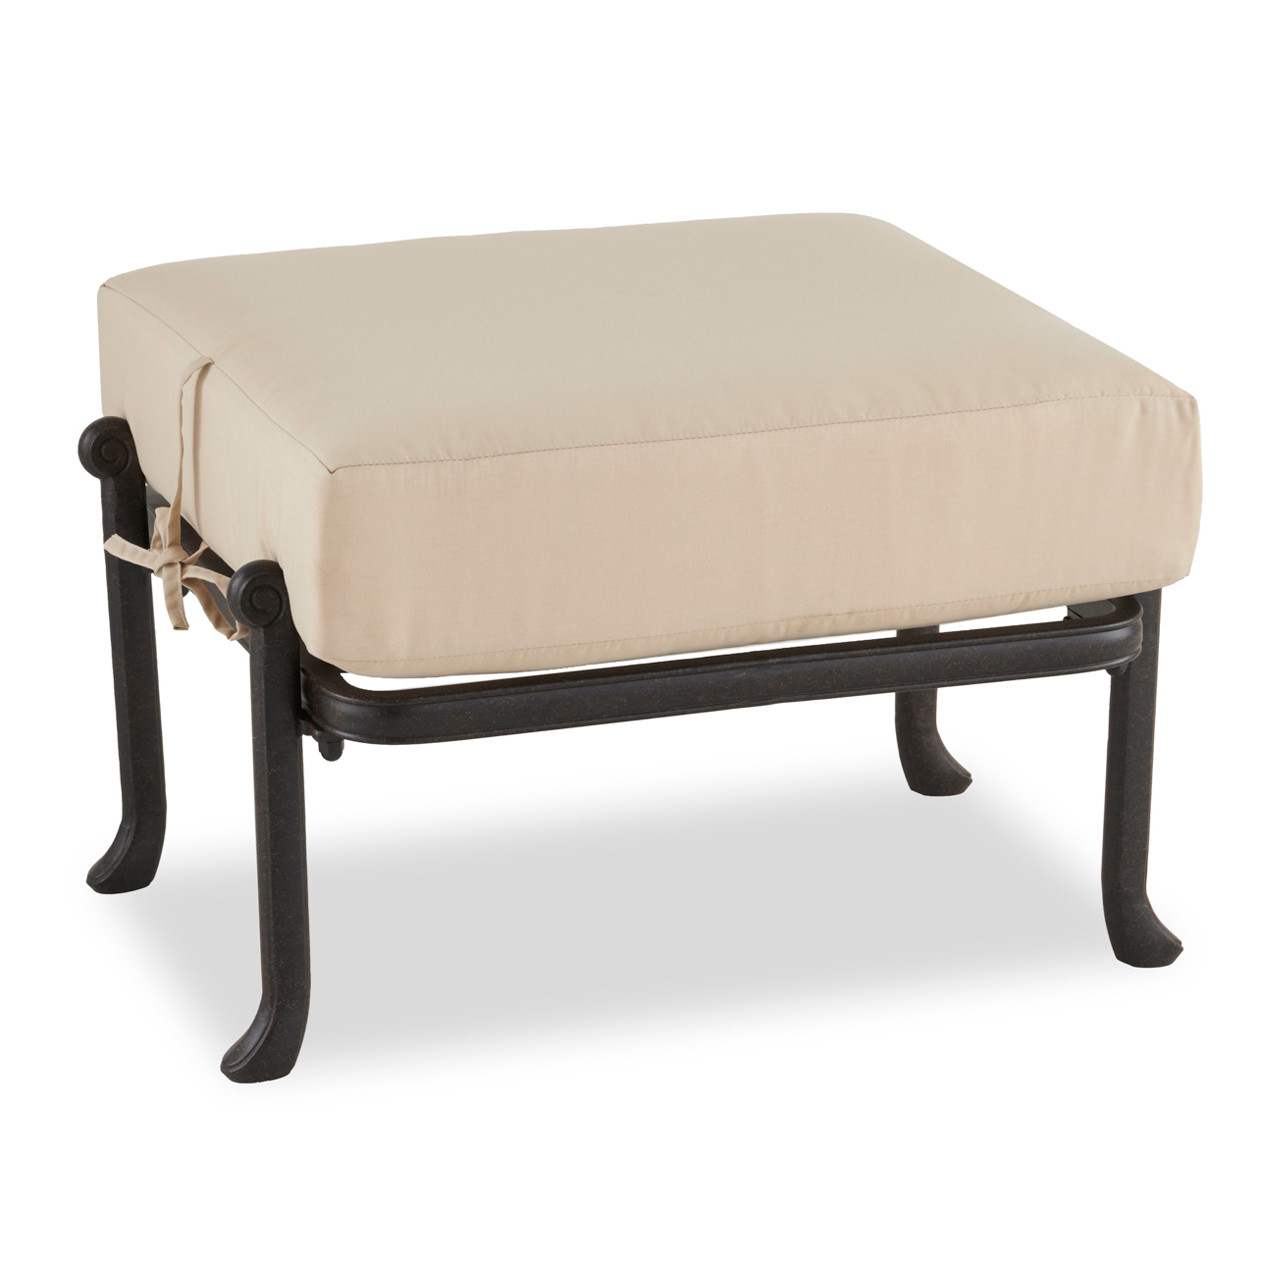 26 x 25.5 in. Club Ottoman Cushion (Frame Sold Separately)